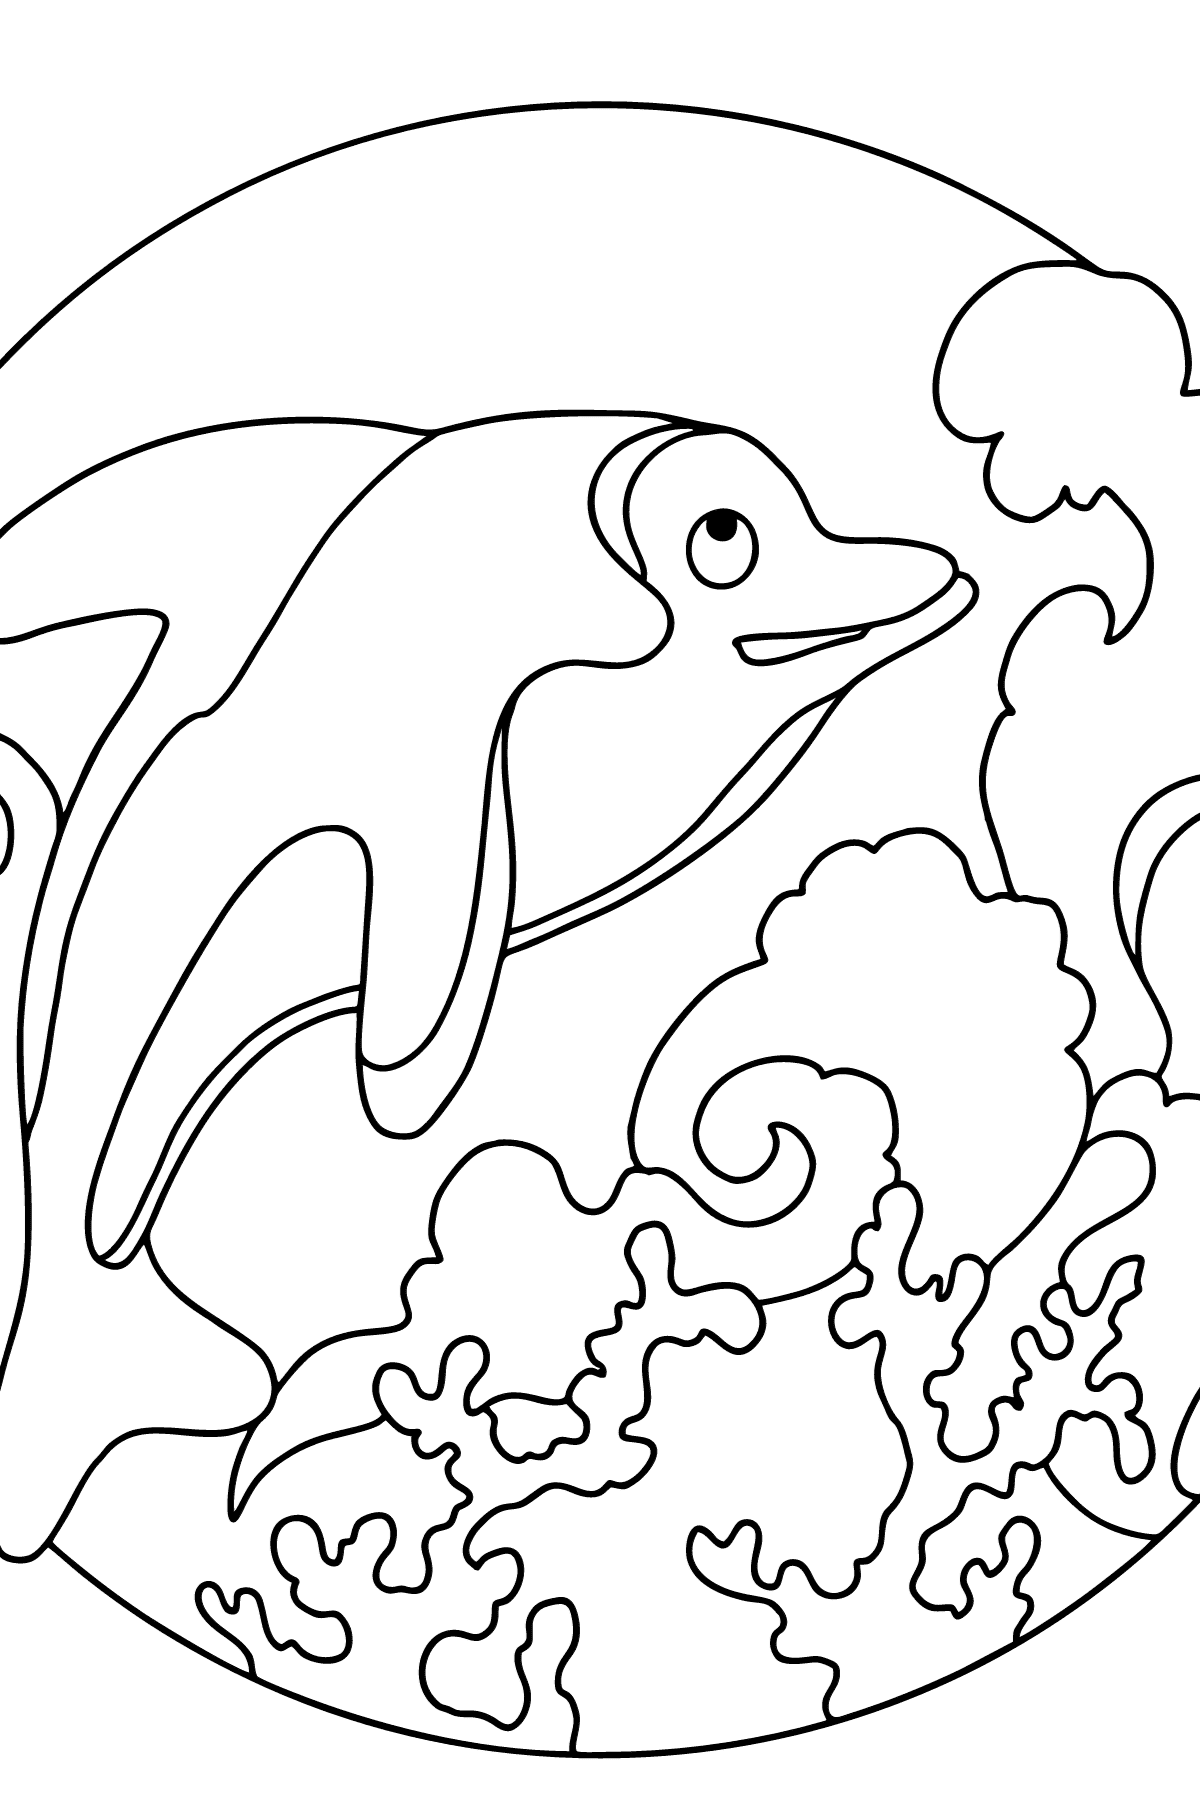 Coloring Page - A Dolphin, a Smart and Friendly Animal - Coloring Pages for Children